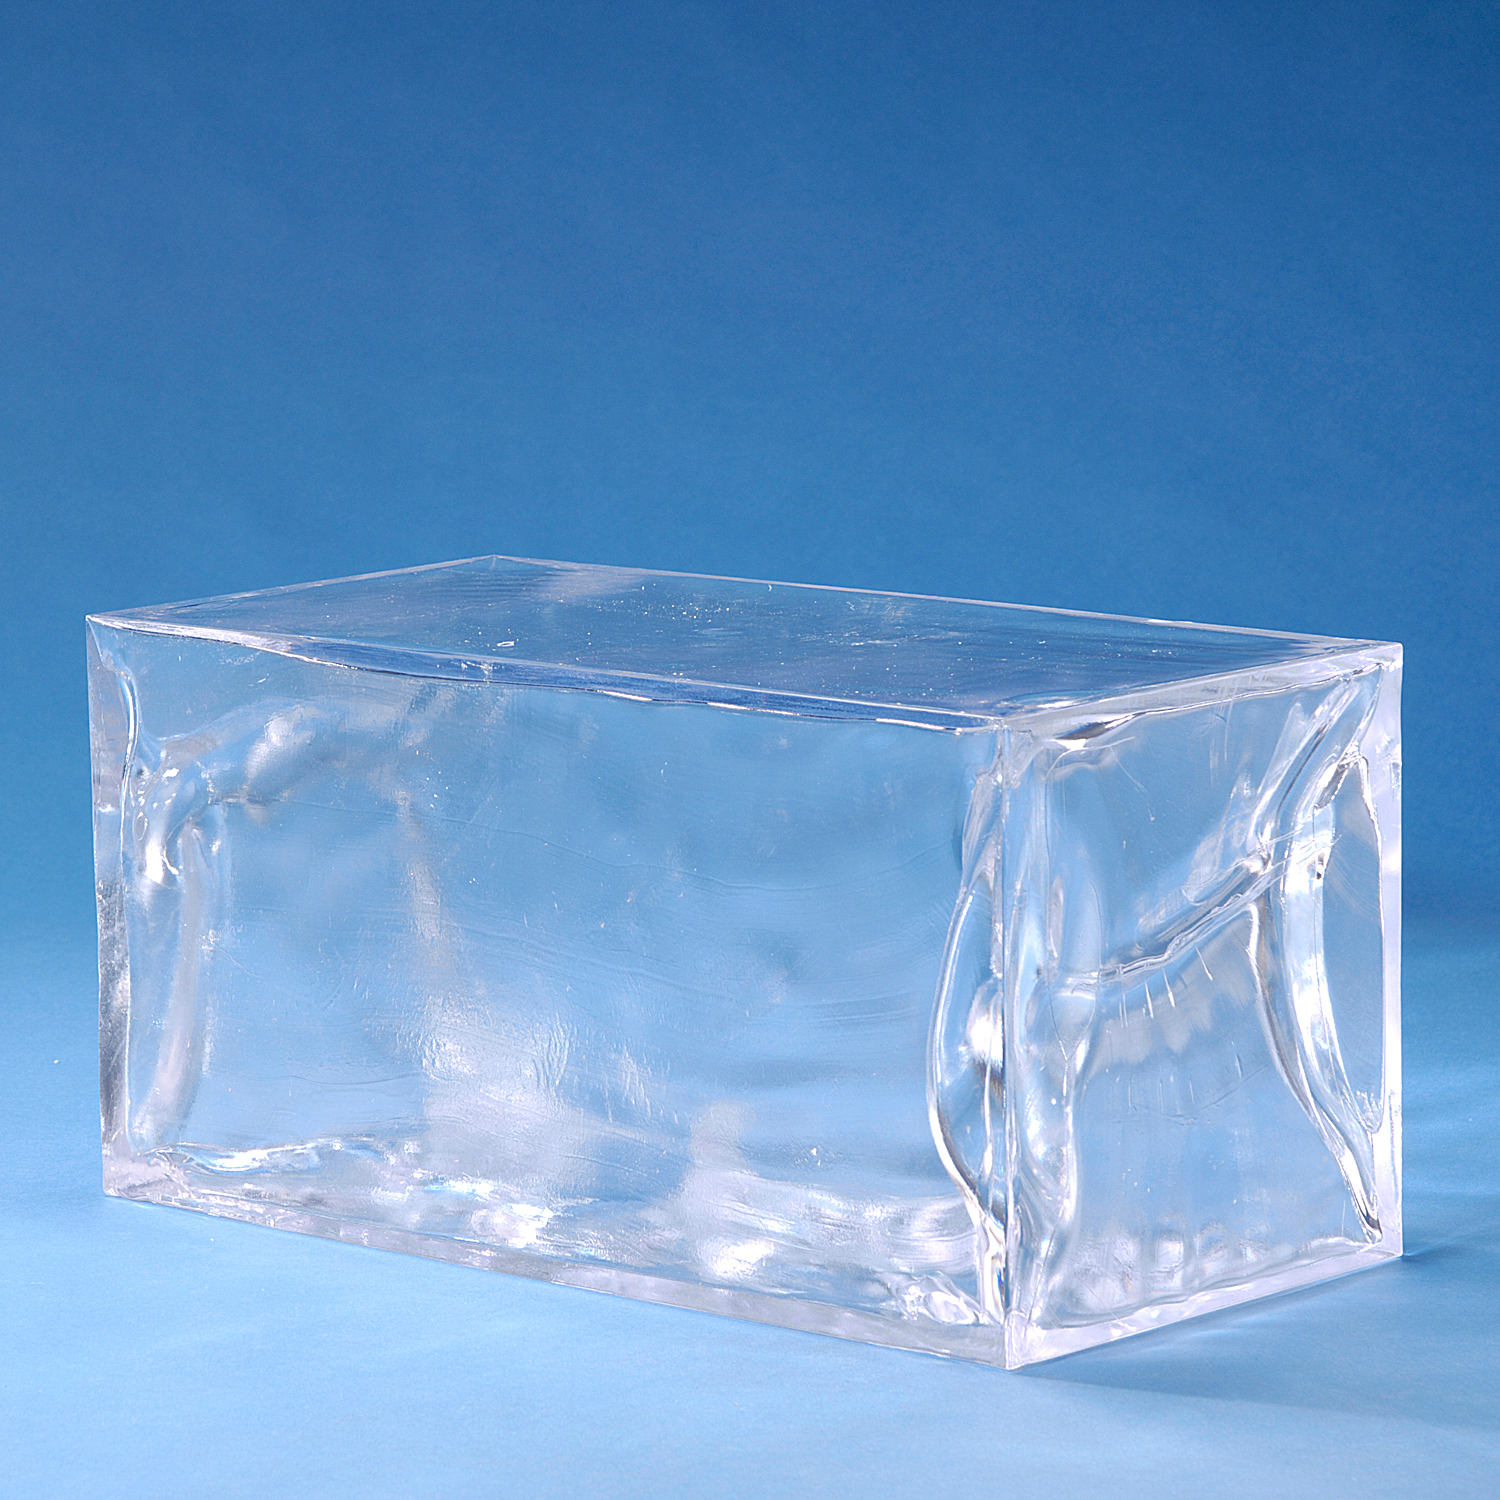 Decorative Ice Block Synthetically Structured